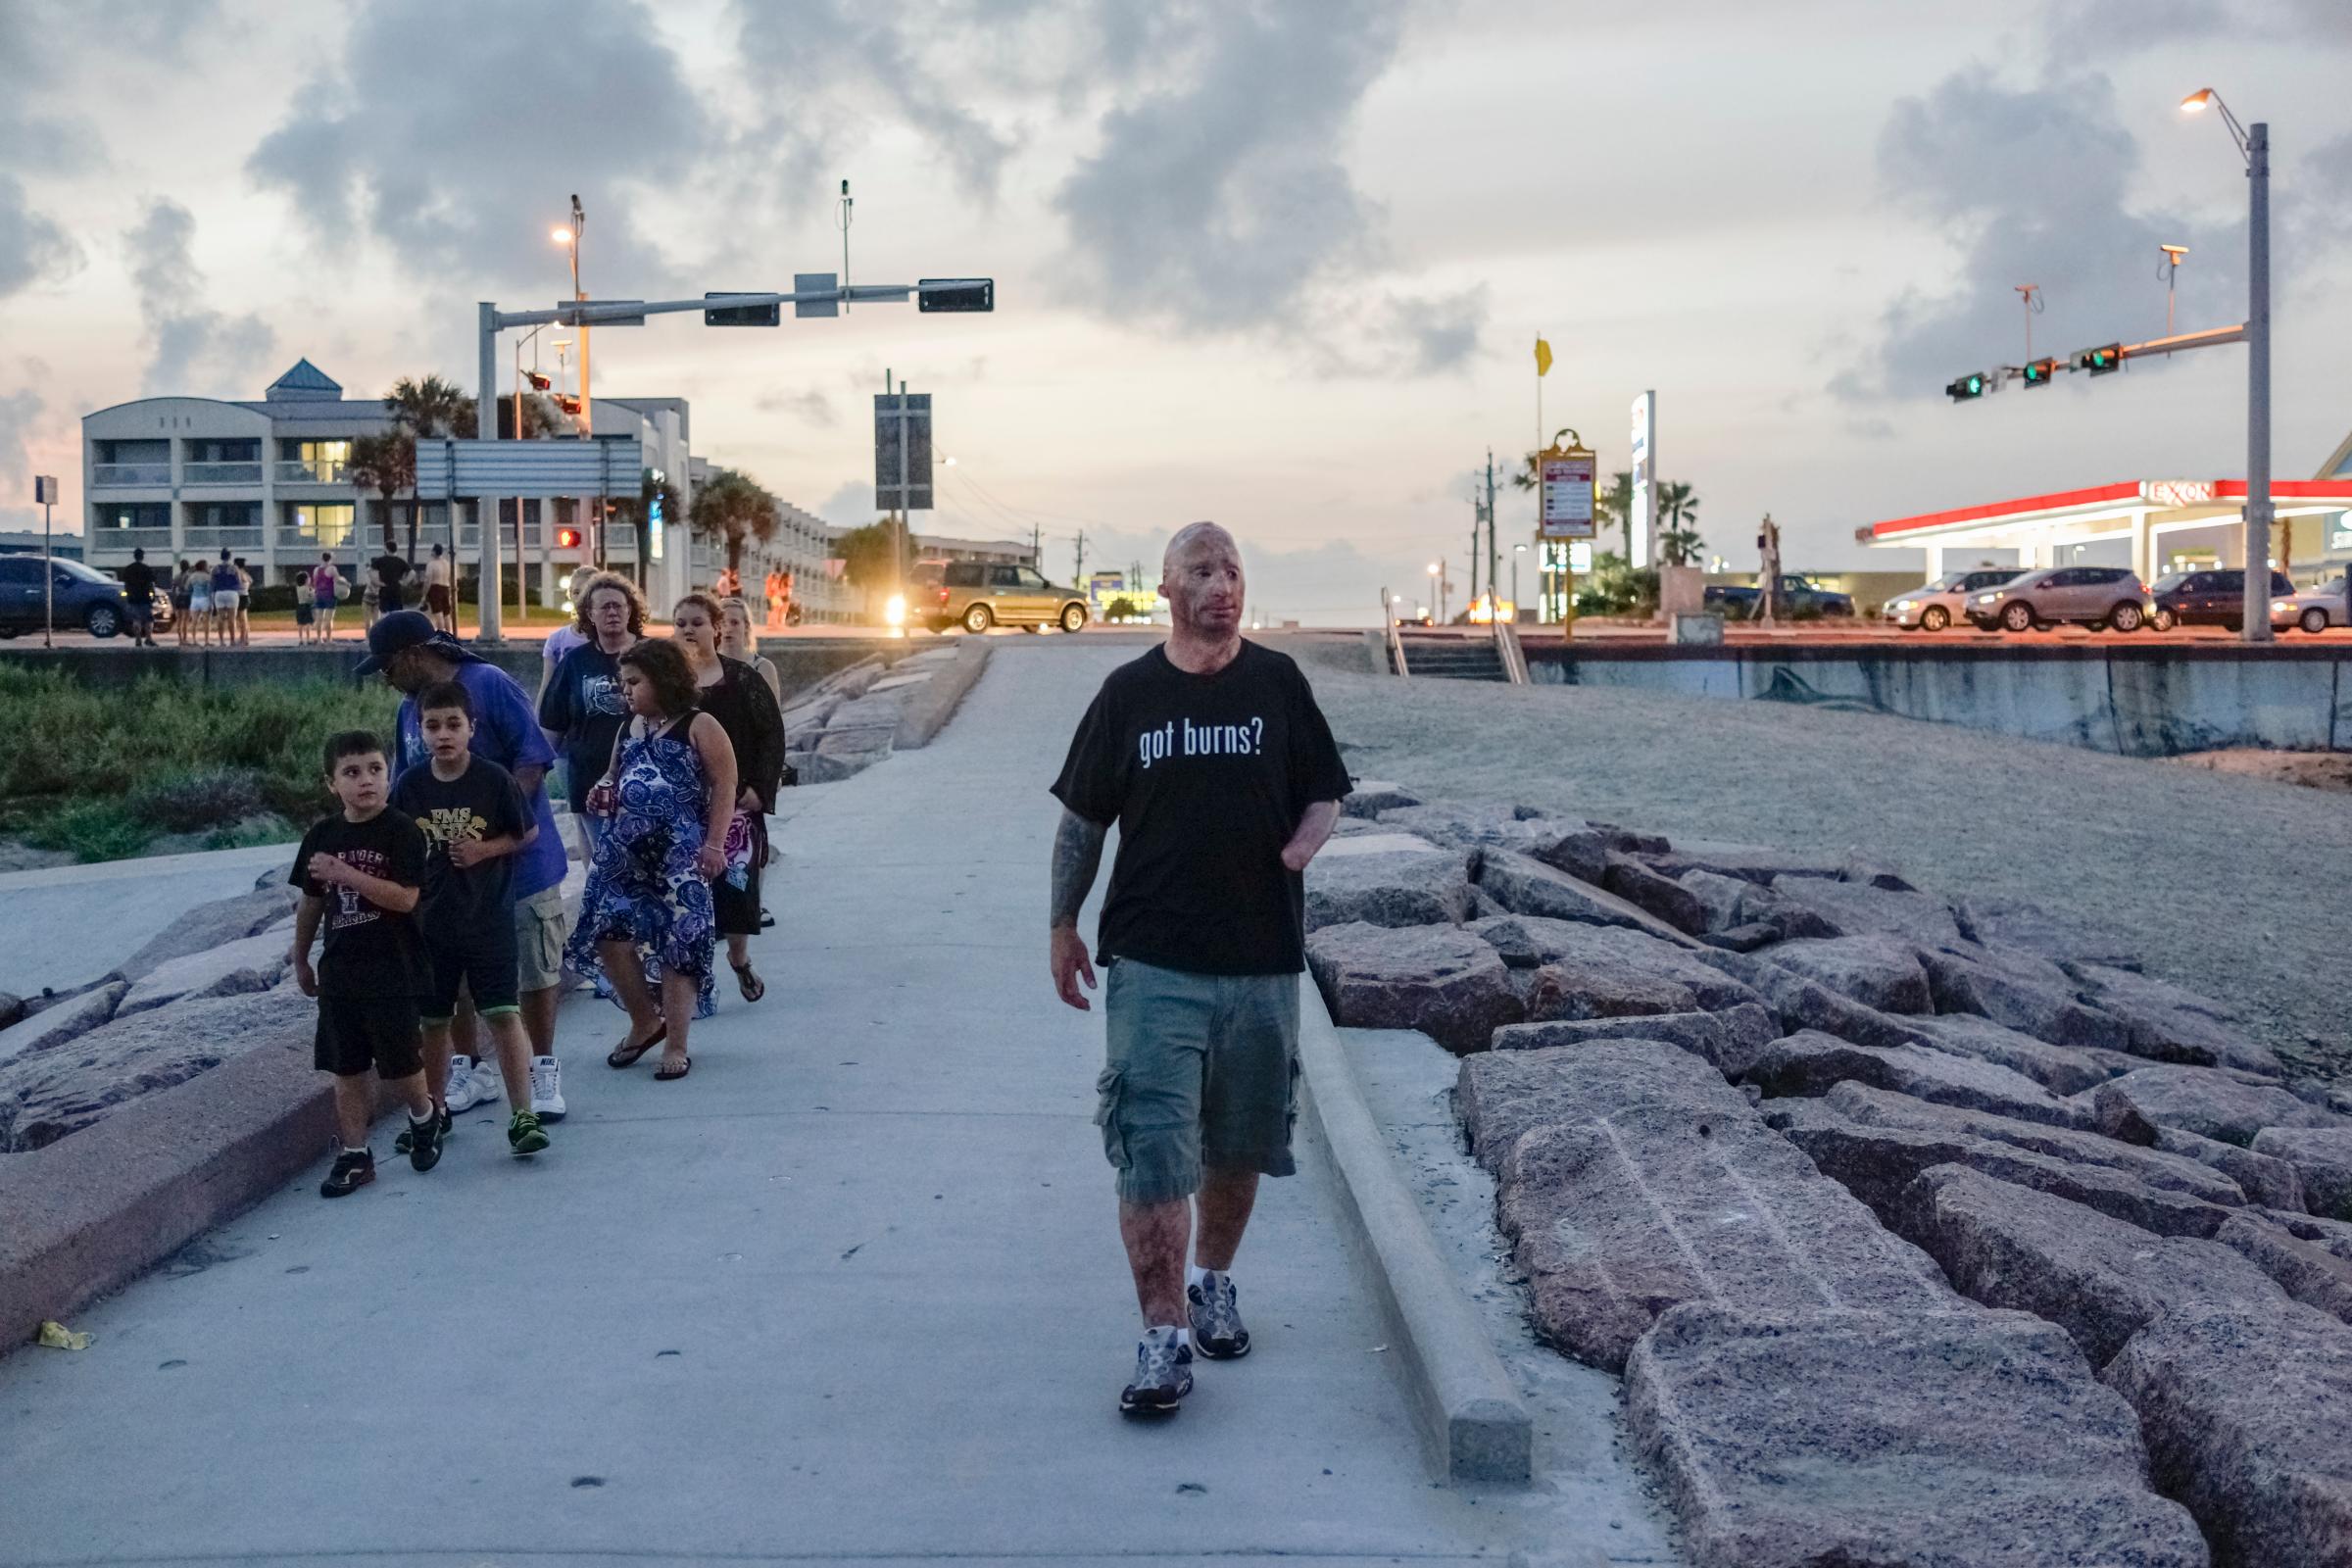 2013. Galveston, TX. USA. Bobby walks along the beach after visiting Grant, a 12-year old who was burned as a toddler. He was having a surgery the next day and Bobby went by his hotel to cheer him up. Bobby Henline, 41, veteran of four tours to Iraq and sole survivor of an IED blast that killed the other four soldiers in his humvee in Iraq in 2007. He is now a standup comedian launching a new career with a routine built around his injuries. He received burns over 38% of his body in the blast.